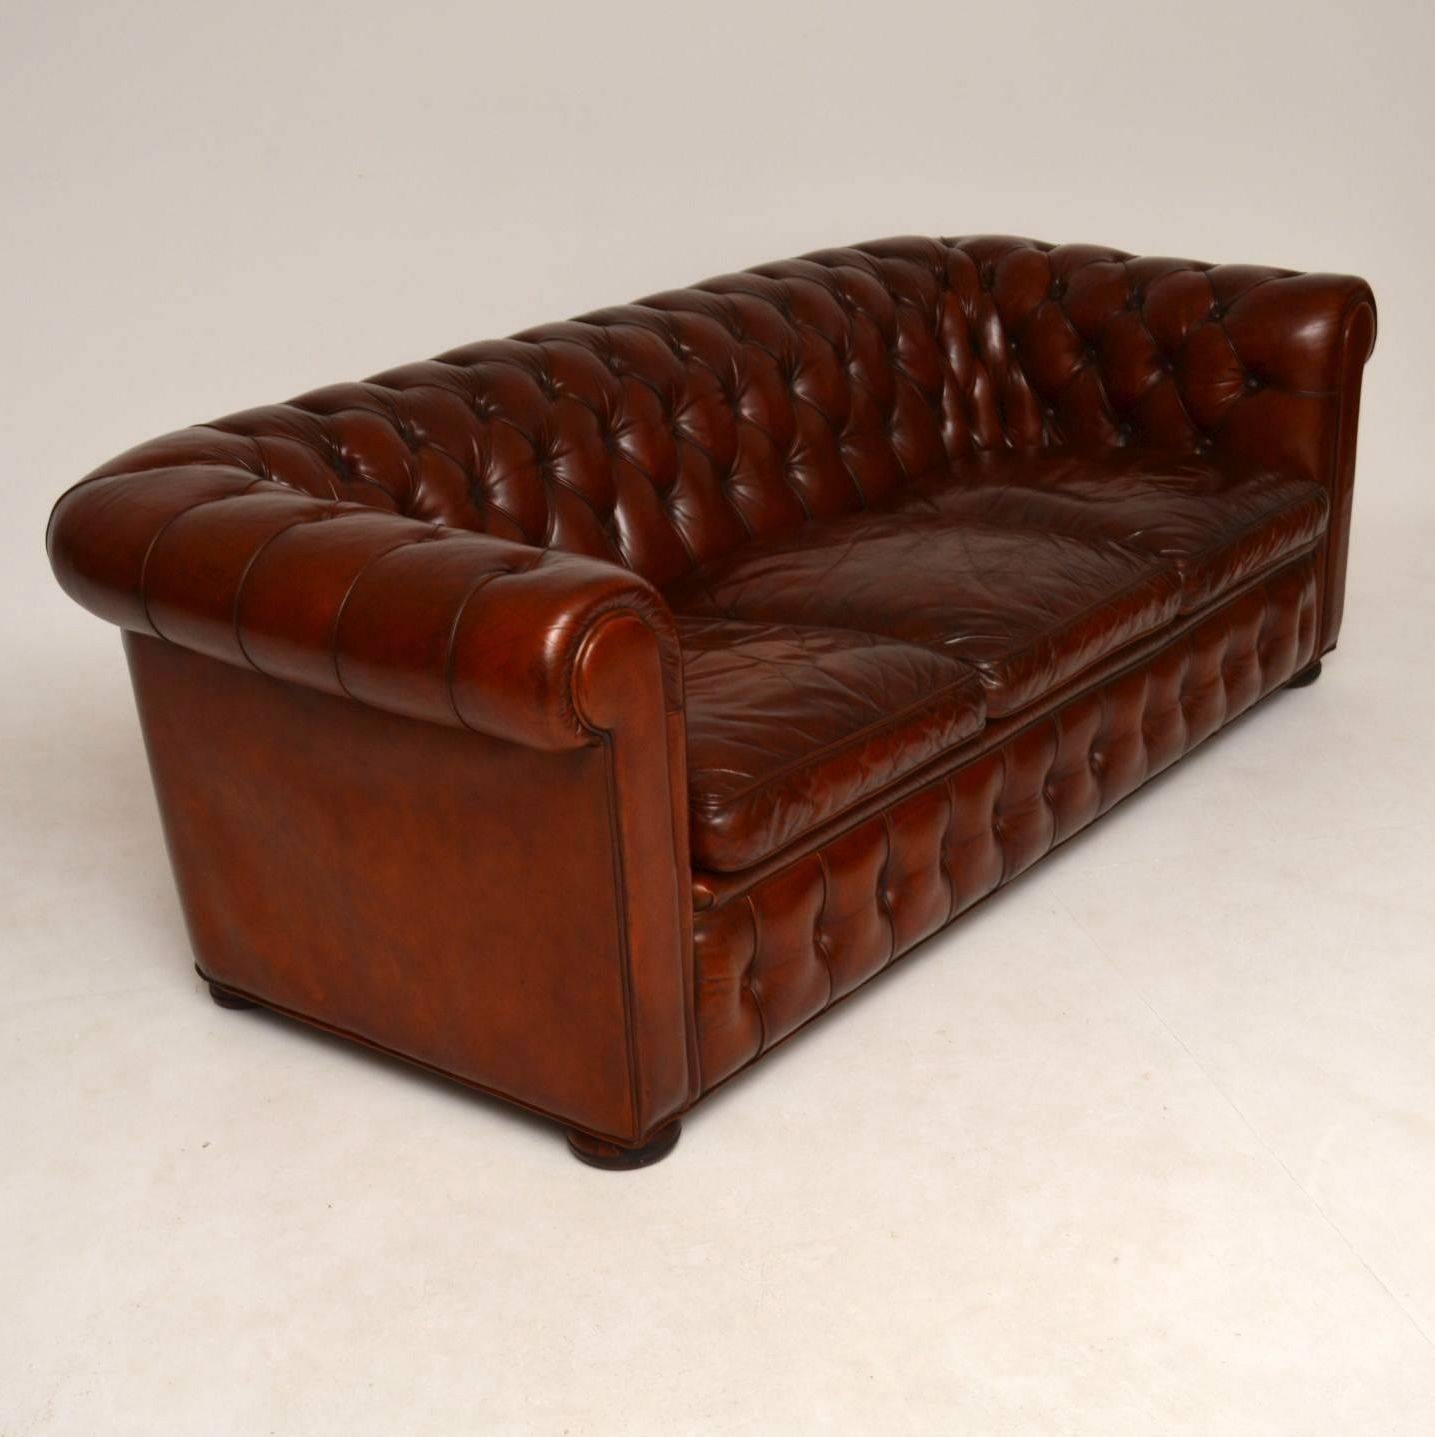 Very comfortable antique three-seat leather chesterfield in good original condition and of excellent quality. The back and arms are deep buttoned with three seat cushions and it sits on turned bun feet. The leather is original & it's a kind of